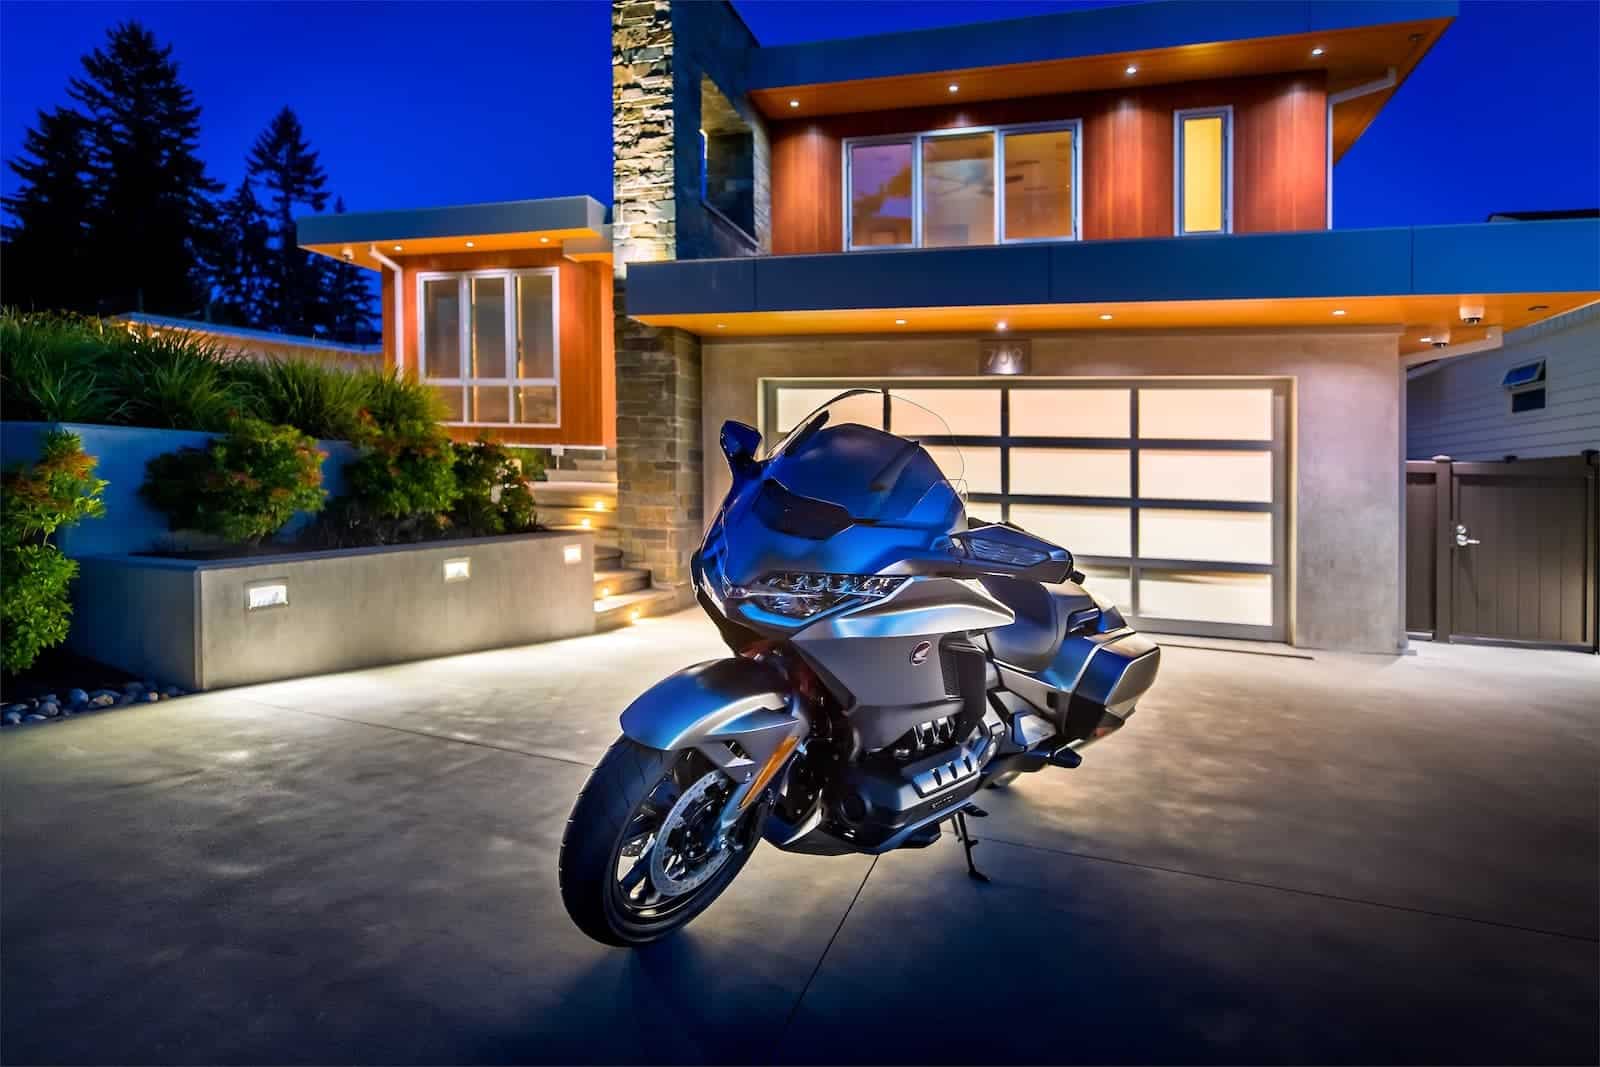 2018 Honda Gold Wing parked in front of house at night time